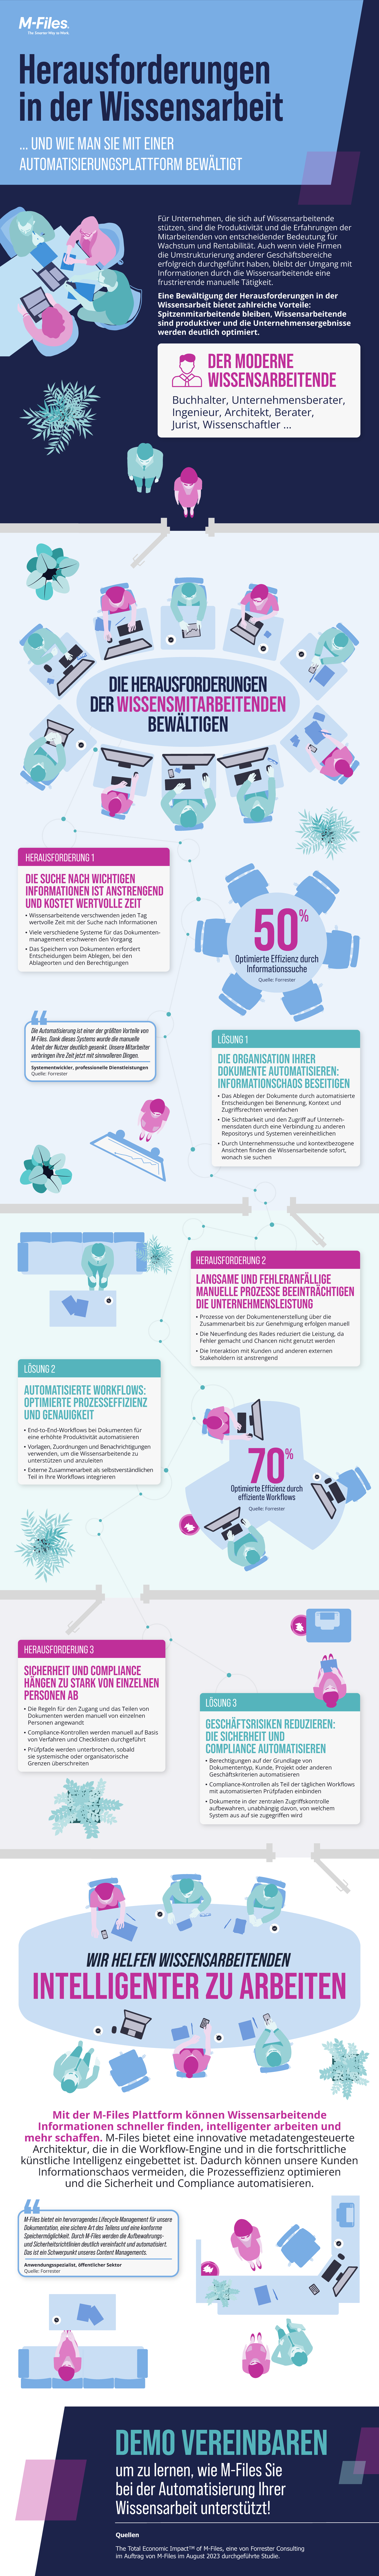 Infographic - Knowledge Work Automation - DE (ID 438476)